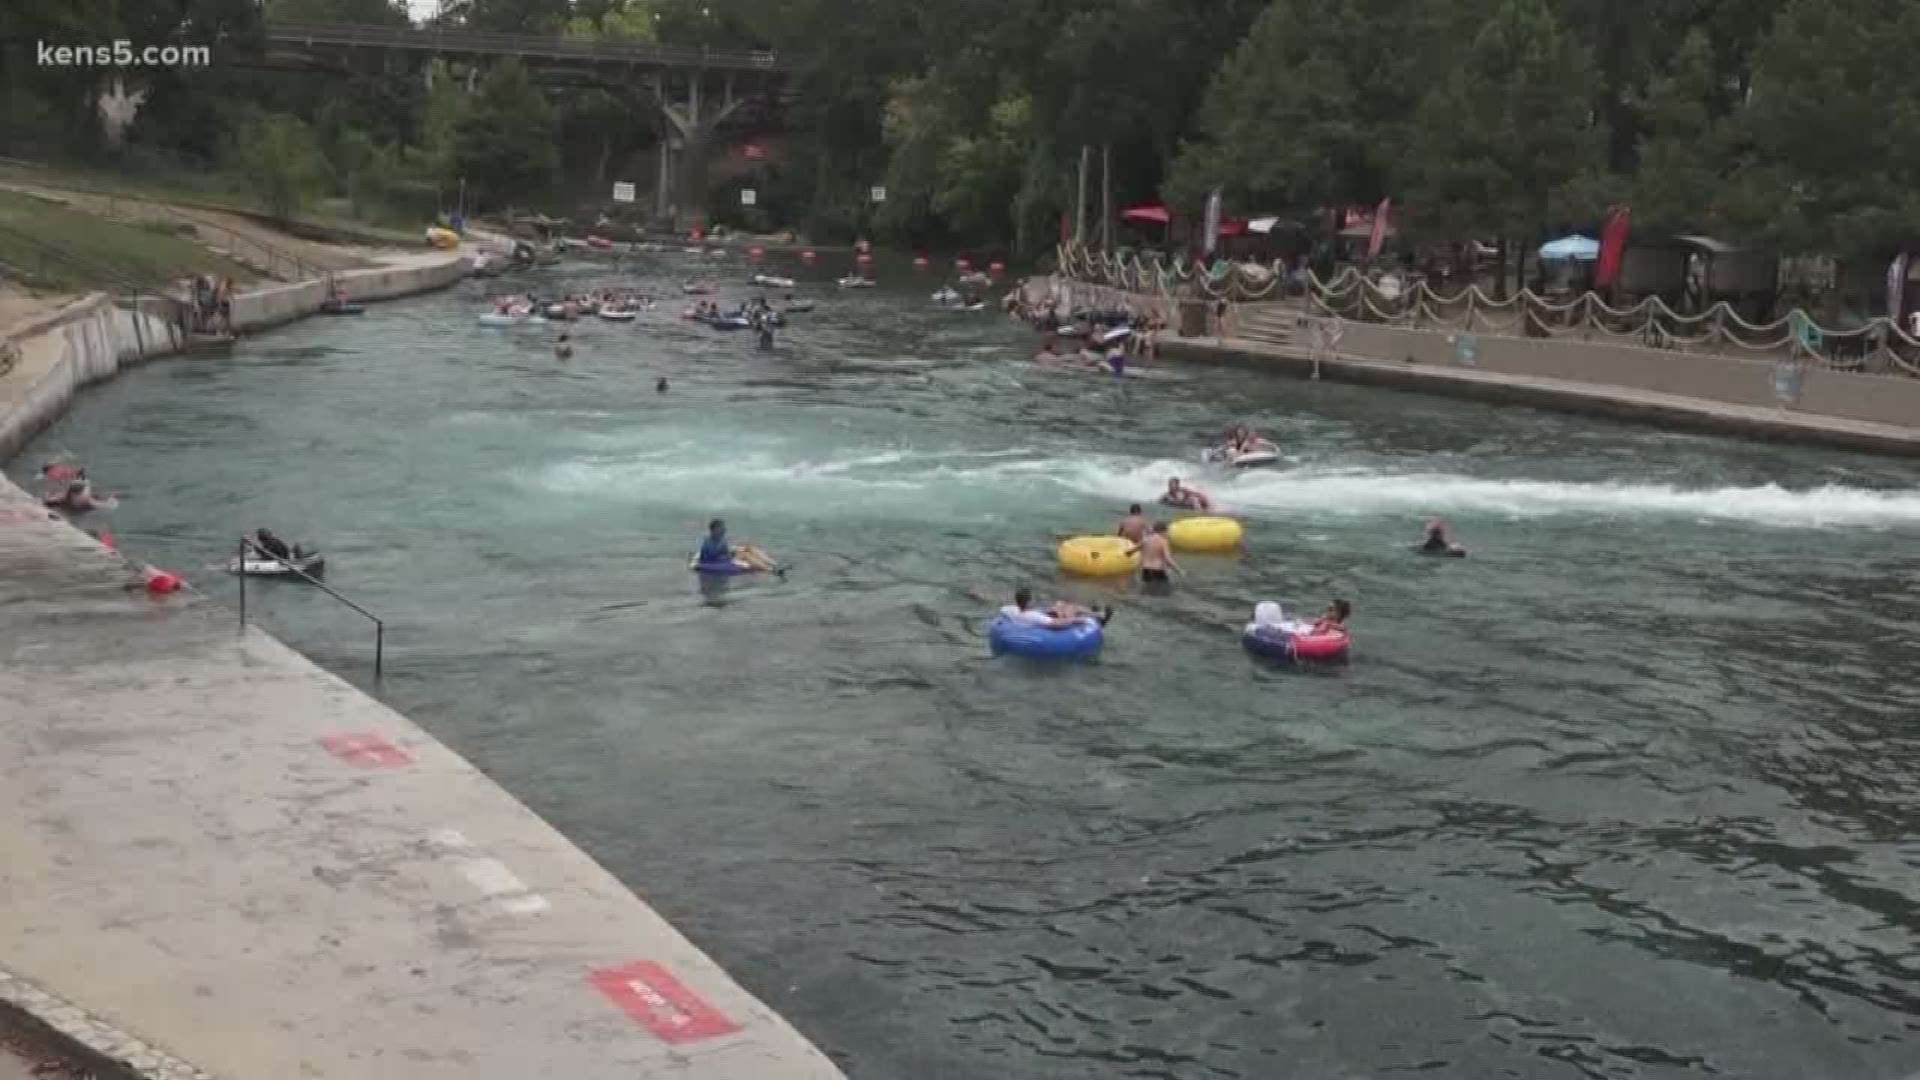 Today's the unofficial end of summer, and that may be what sent people flocking to the Comal River for one last summer float. Eyewitness News reporter Jeremy Baker has more.